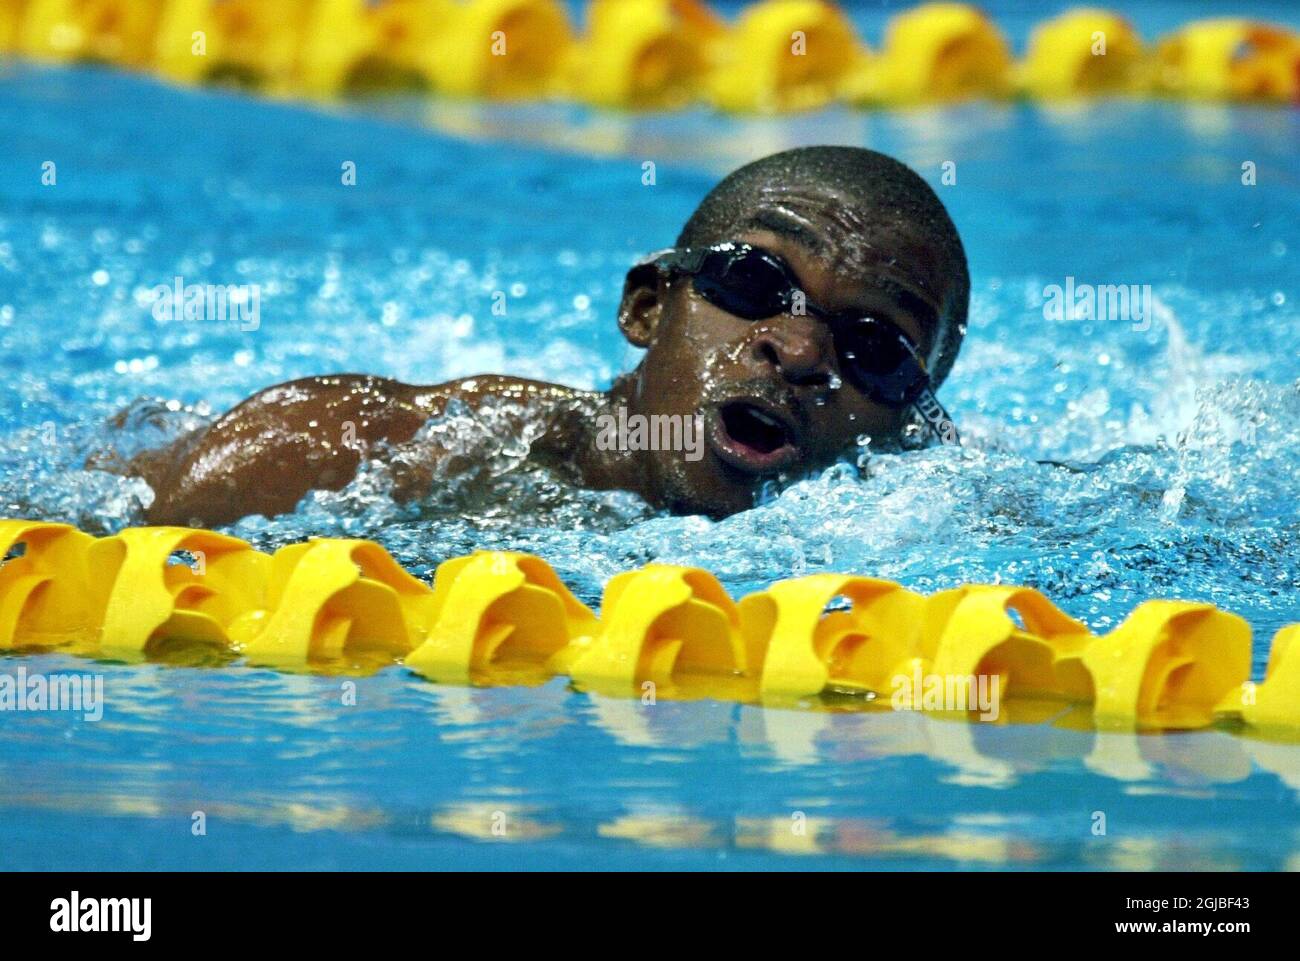 Equatorial Guinea's Eric Moussambani gulps for air during his heat. He was the only competitor after the two other swimmers were disqualified for a false start. He finished the heat in a record slowest time of 1m52.72seconds, but gained a standing ovation from the capacity crowd.  Stock Photo